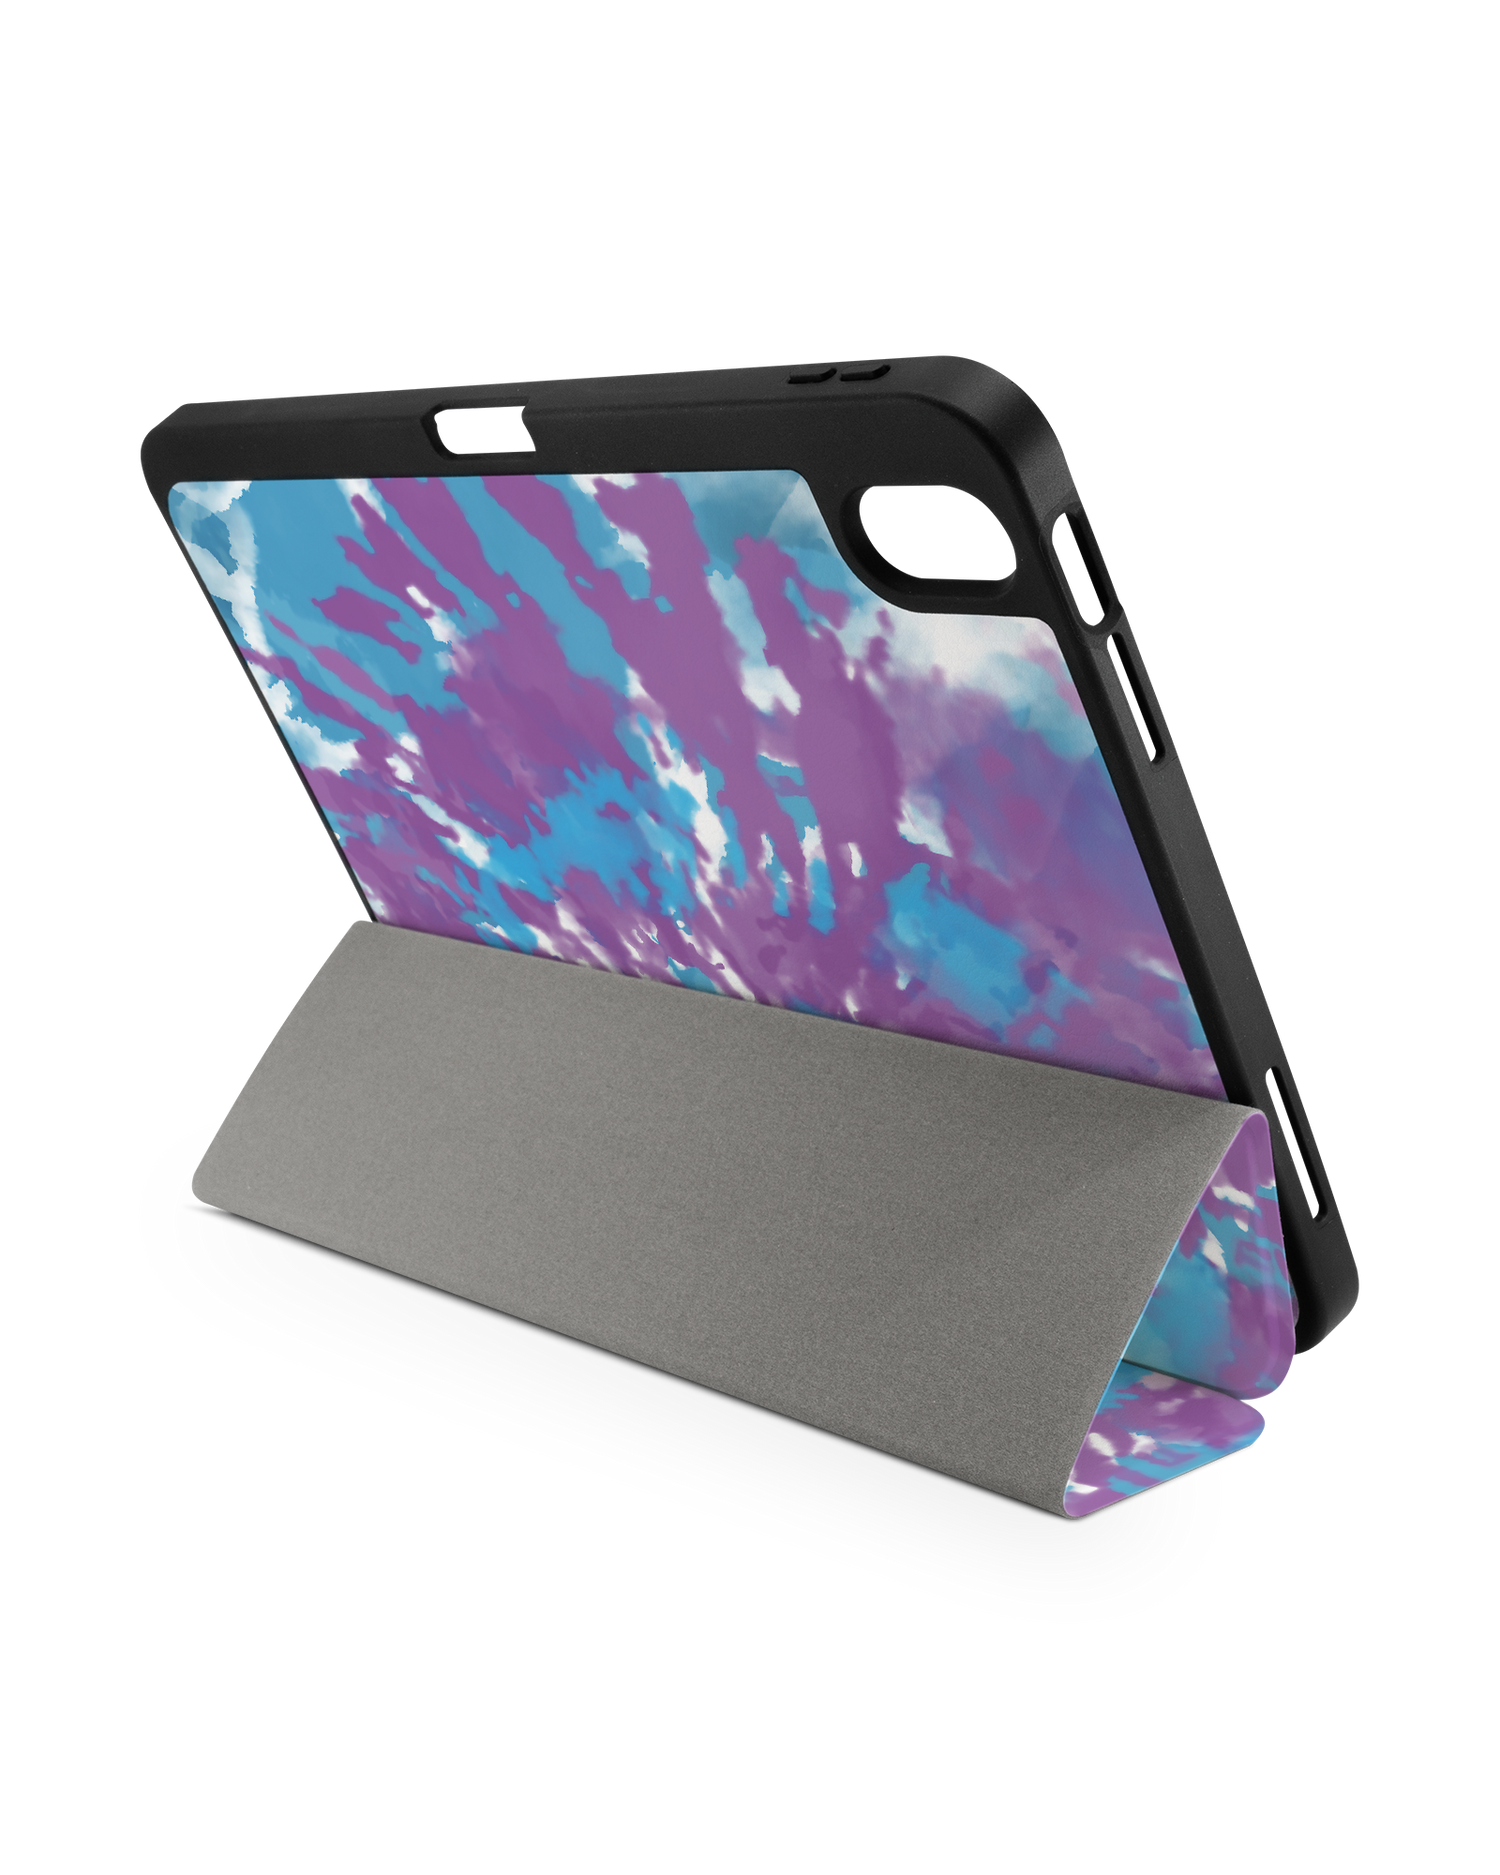 Classic Tie Dye iPad Case with Pencil Holder for Apple iPad (10th Generation): Set up in landscape format (back view)